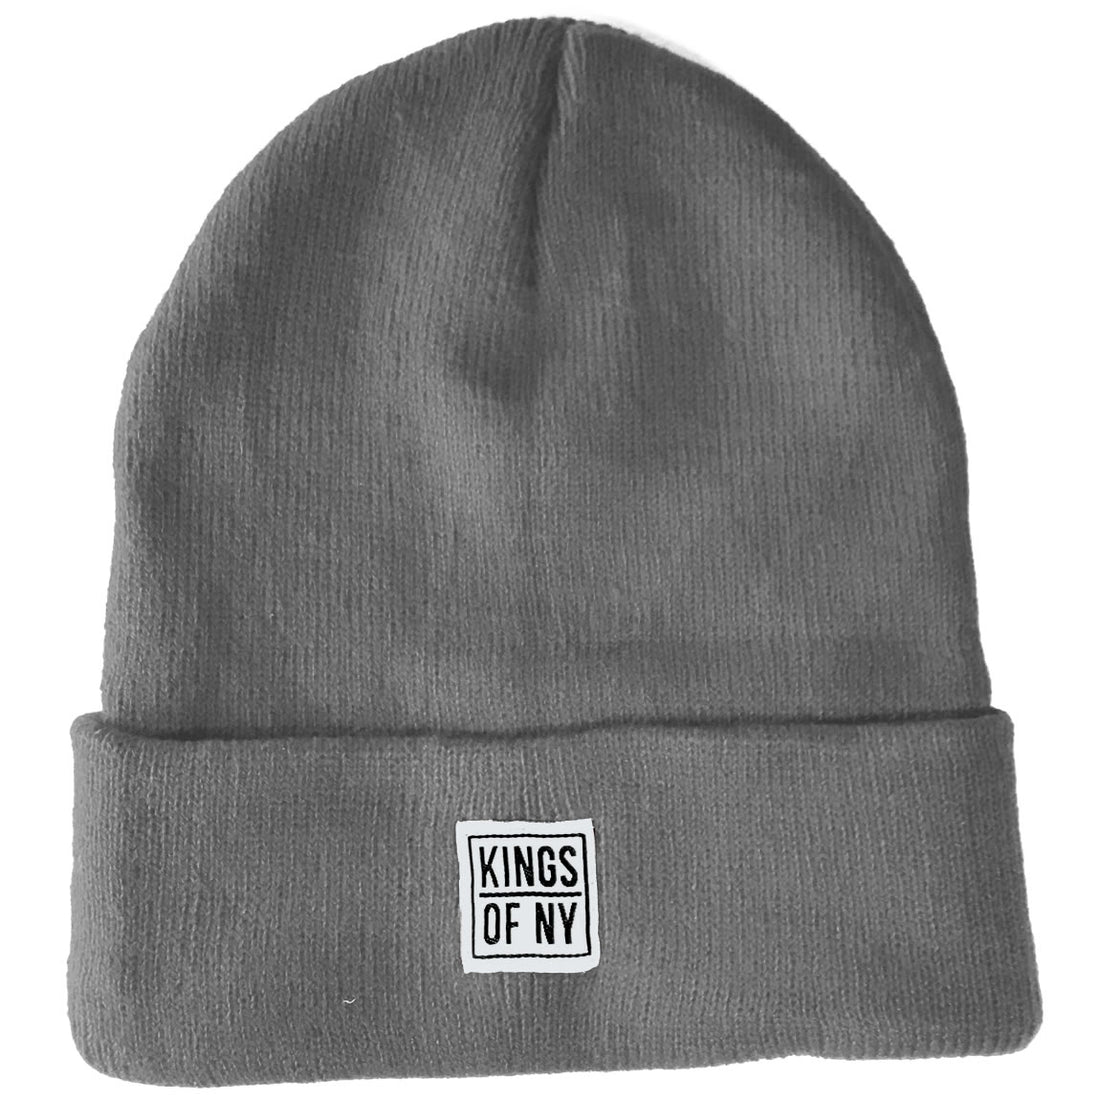 Light Grey Beanie Hat by Kings Of NY